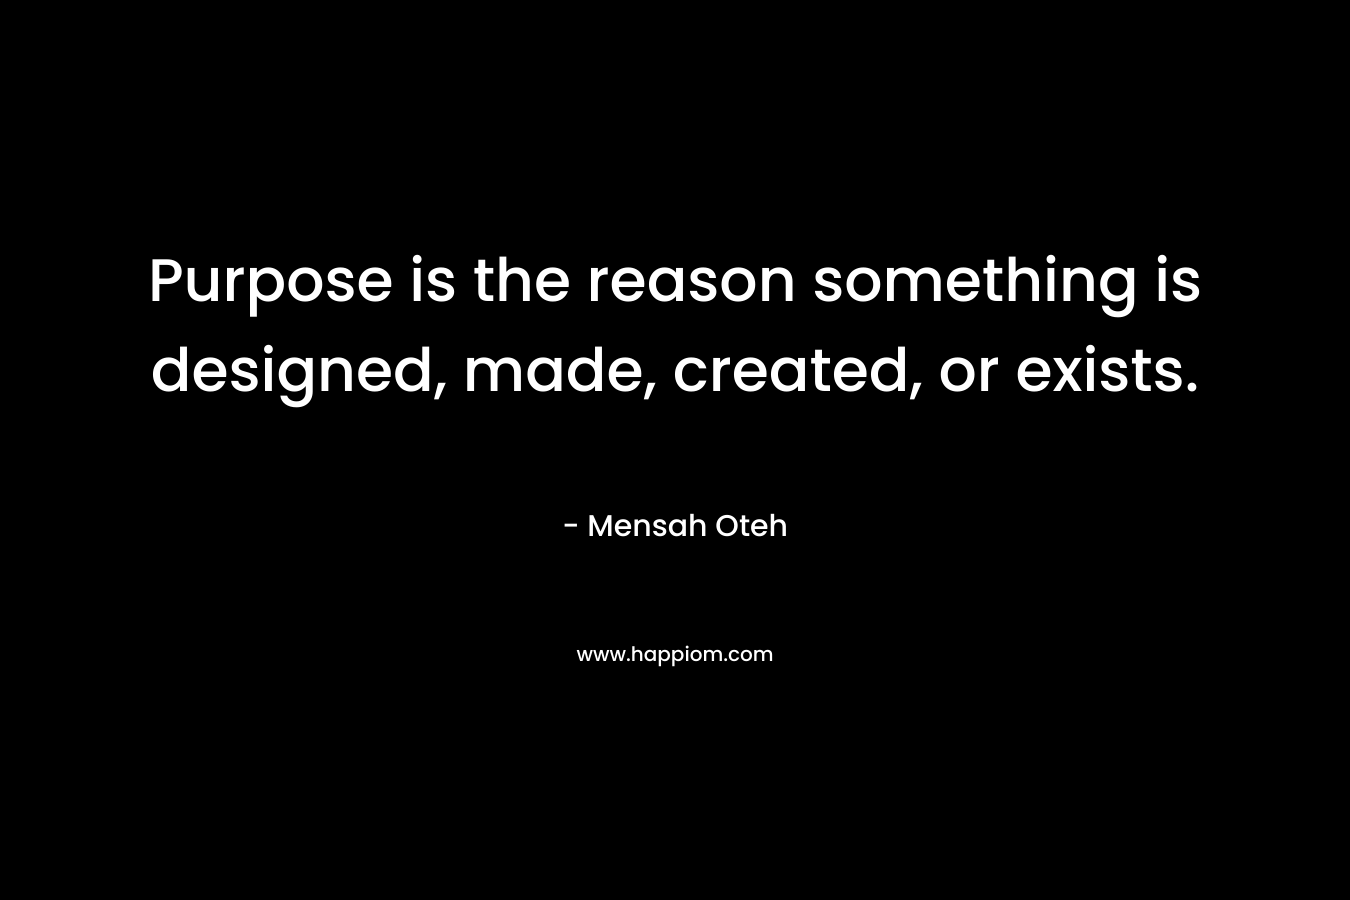 Purpose is the reason something is designed, made, created, or exists.